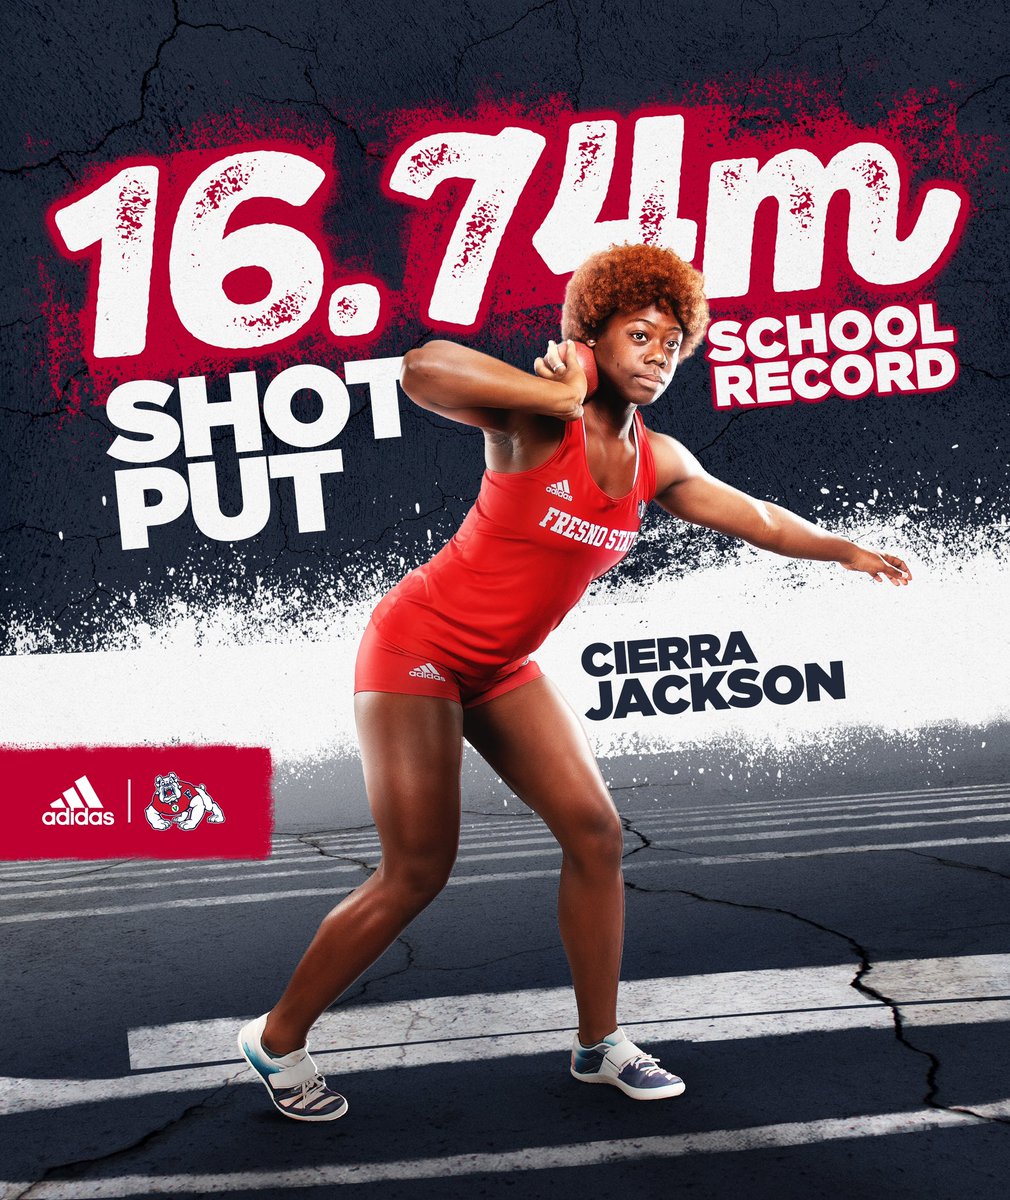 Record are meant to be 𝐁𝐑𝐎𝐊𝐄𝐍 😤

With a 16.74m throw, Cierra Jackson now holds the Fresno State shot put record, previously held by Dot Jones since 1986. 

#GoDogs | #ForTheV | #MakingHerMark